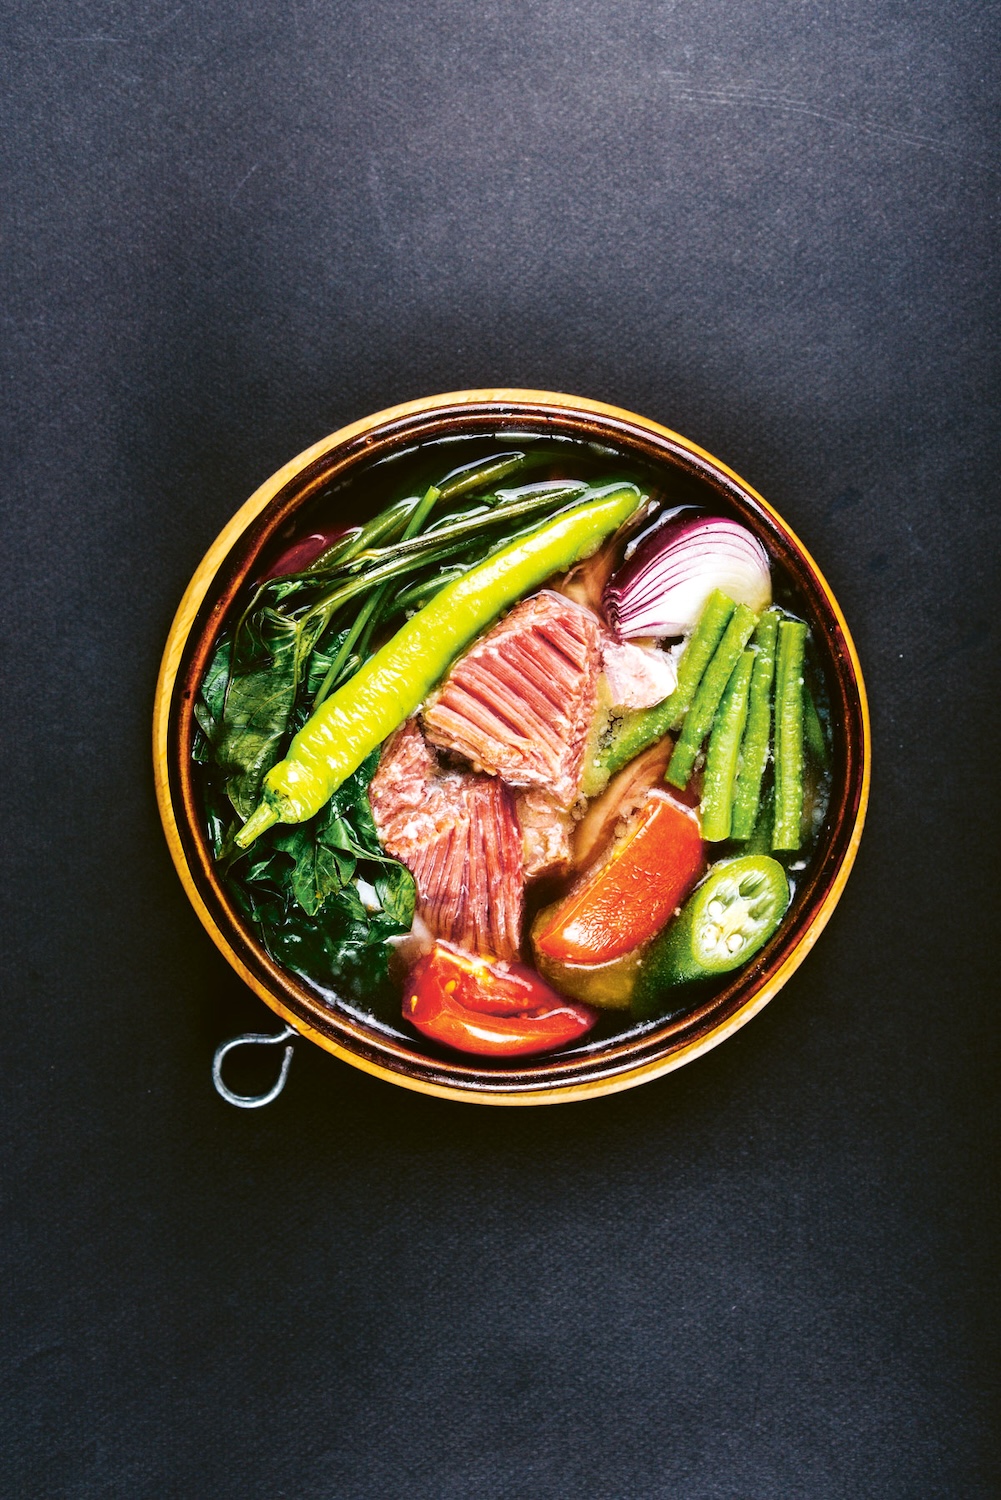 One of the signature dishes of Filipino cuisine is the sour and versatile sinigang